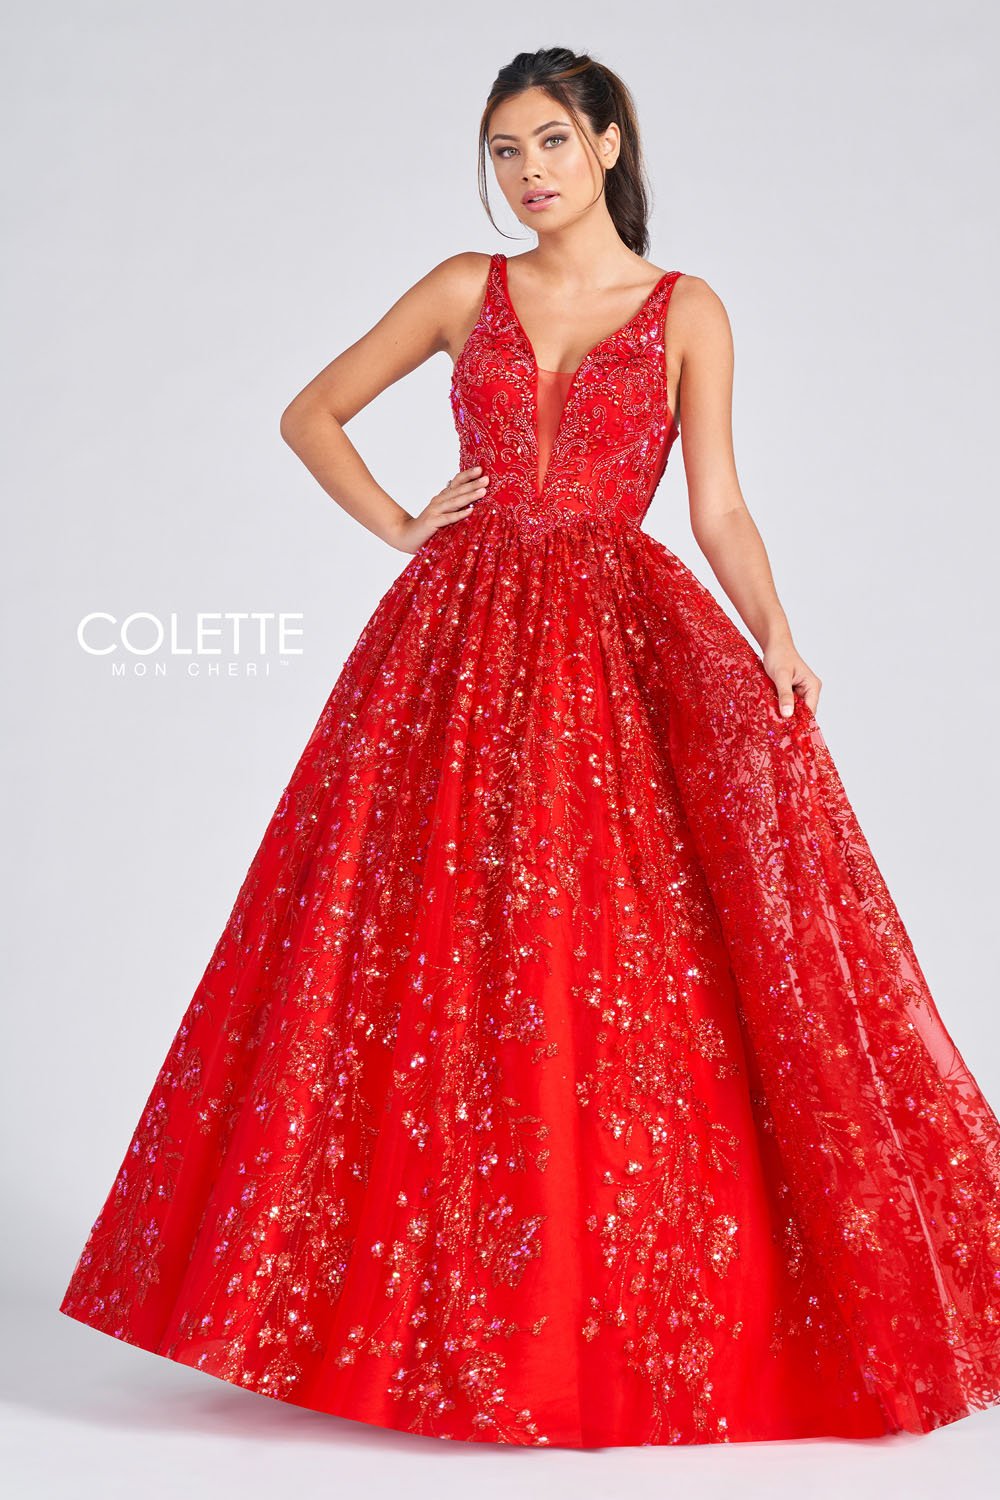 Colette CL12237 Red prom dresses.  Red prom dresses image by Colette.